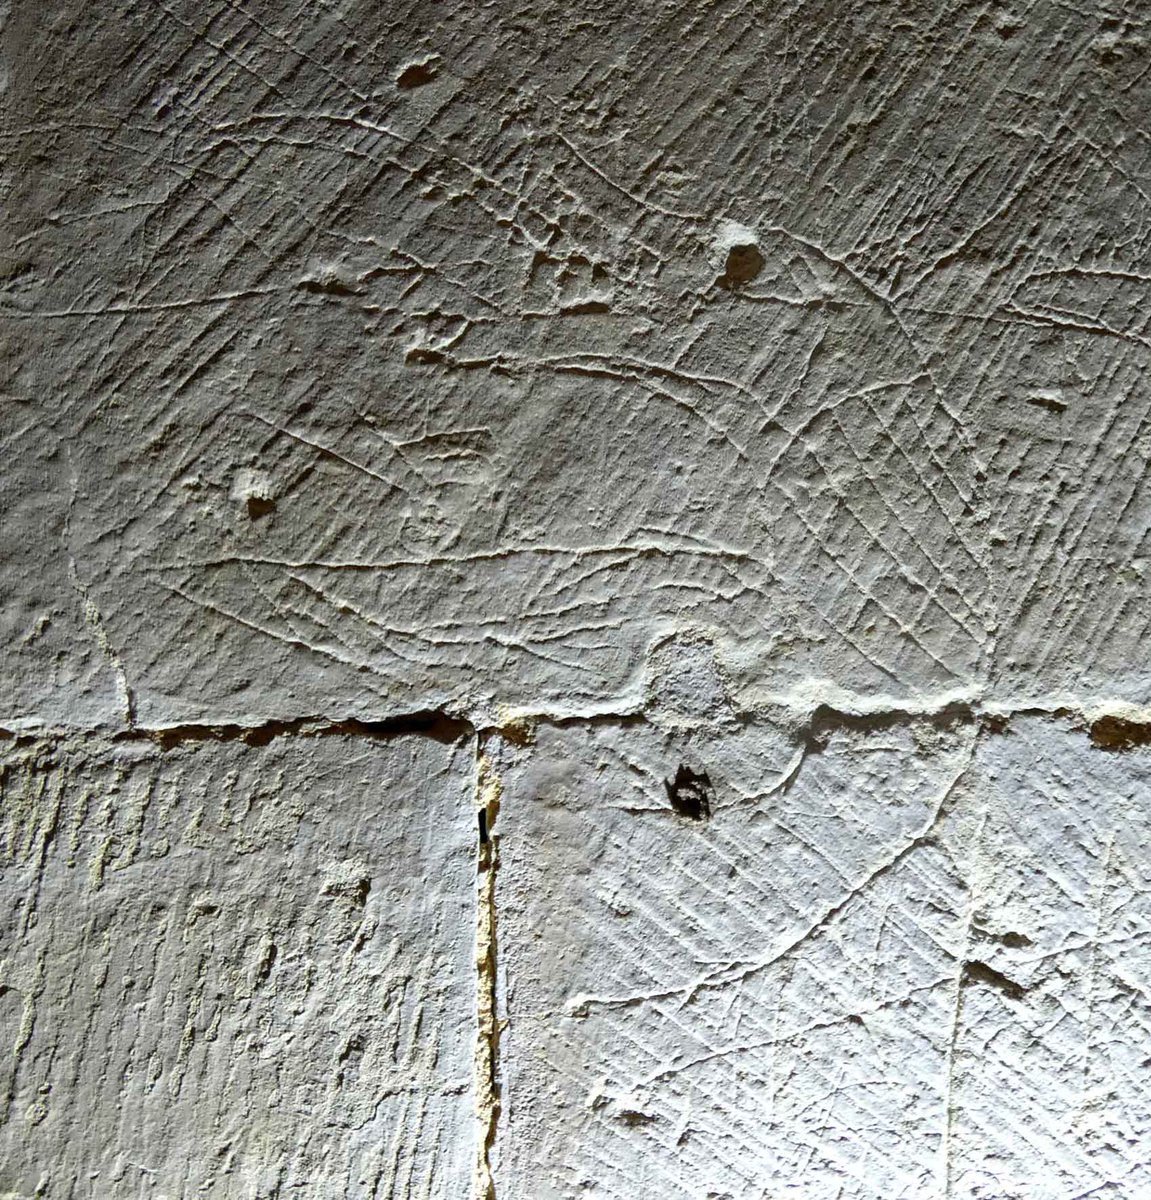 A couple more medieval graffiti from St Albans cathedral - where this fantastic backwards facing dragon/bird looks very C12th in origin. One of two there. Scary.